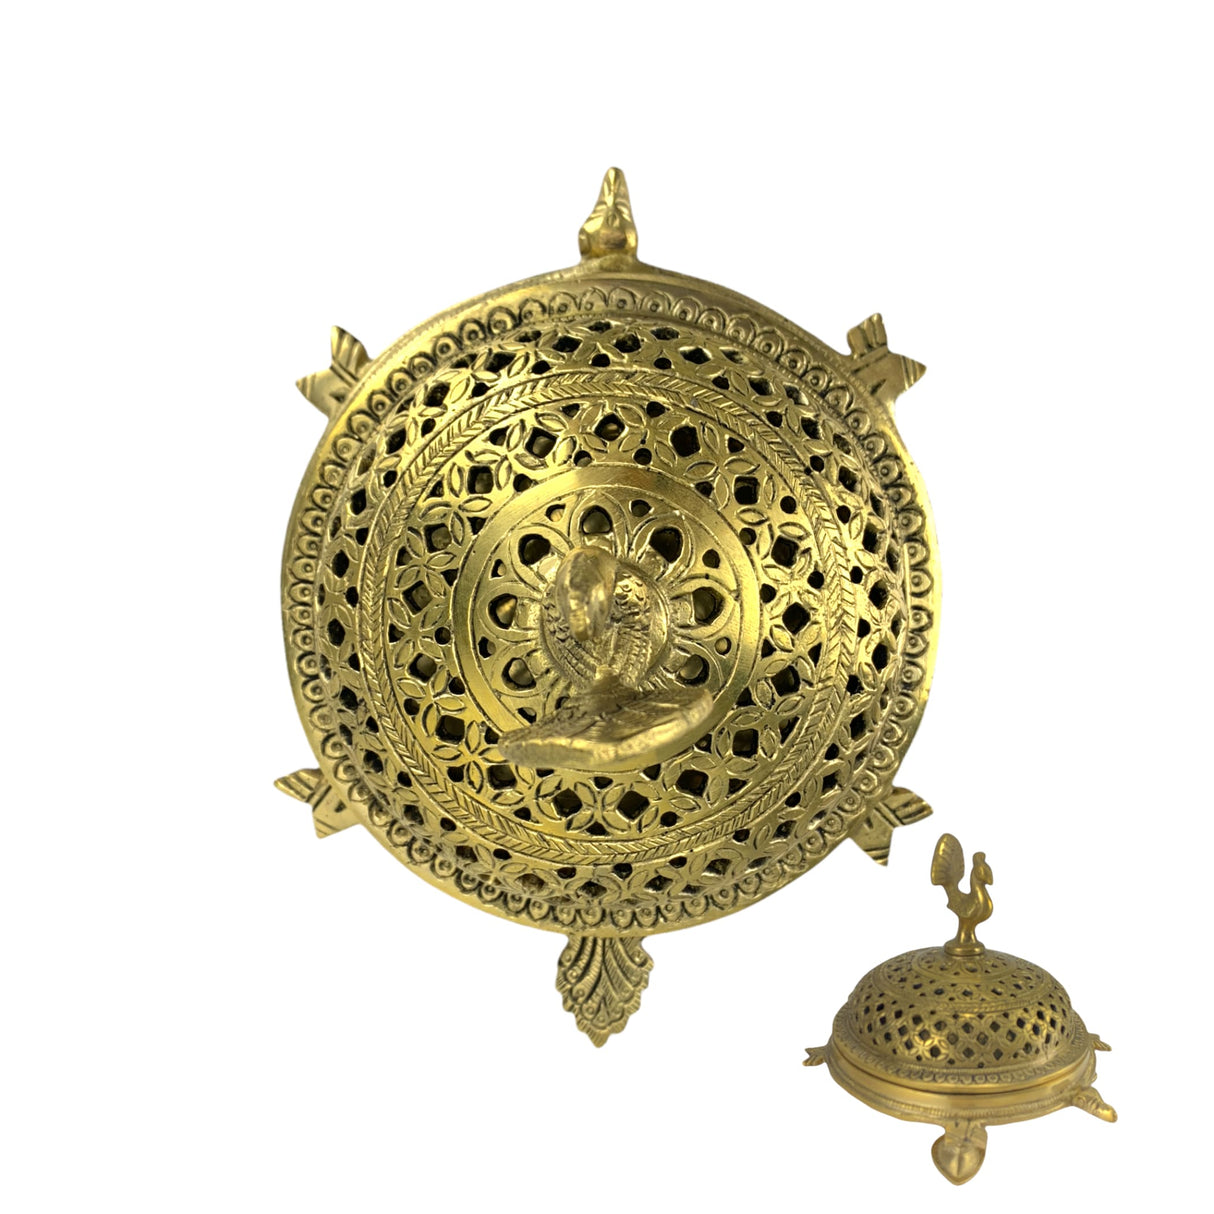 Peacock brass incense stick holder agarbatti and dhoop ash